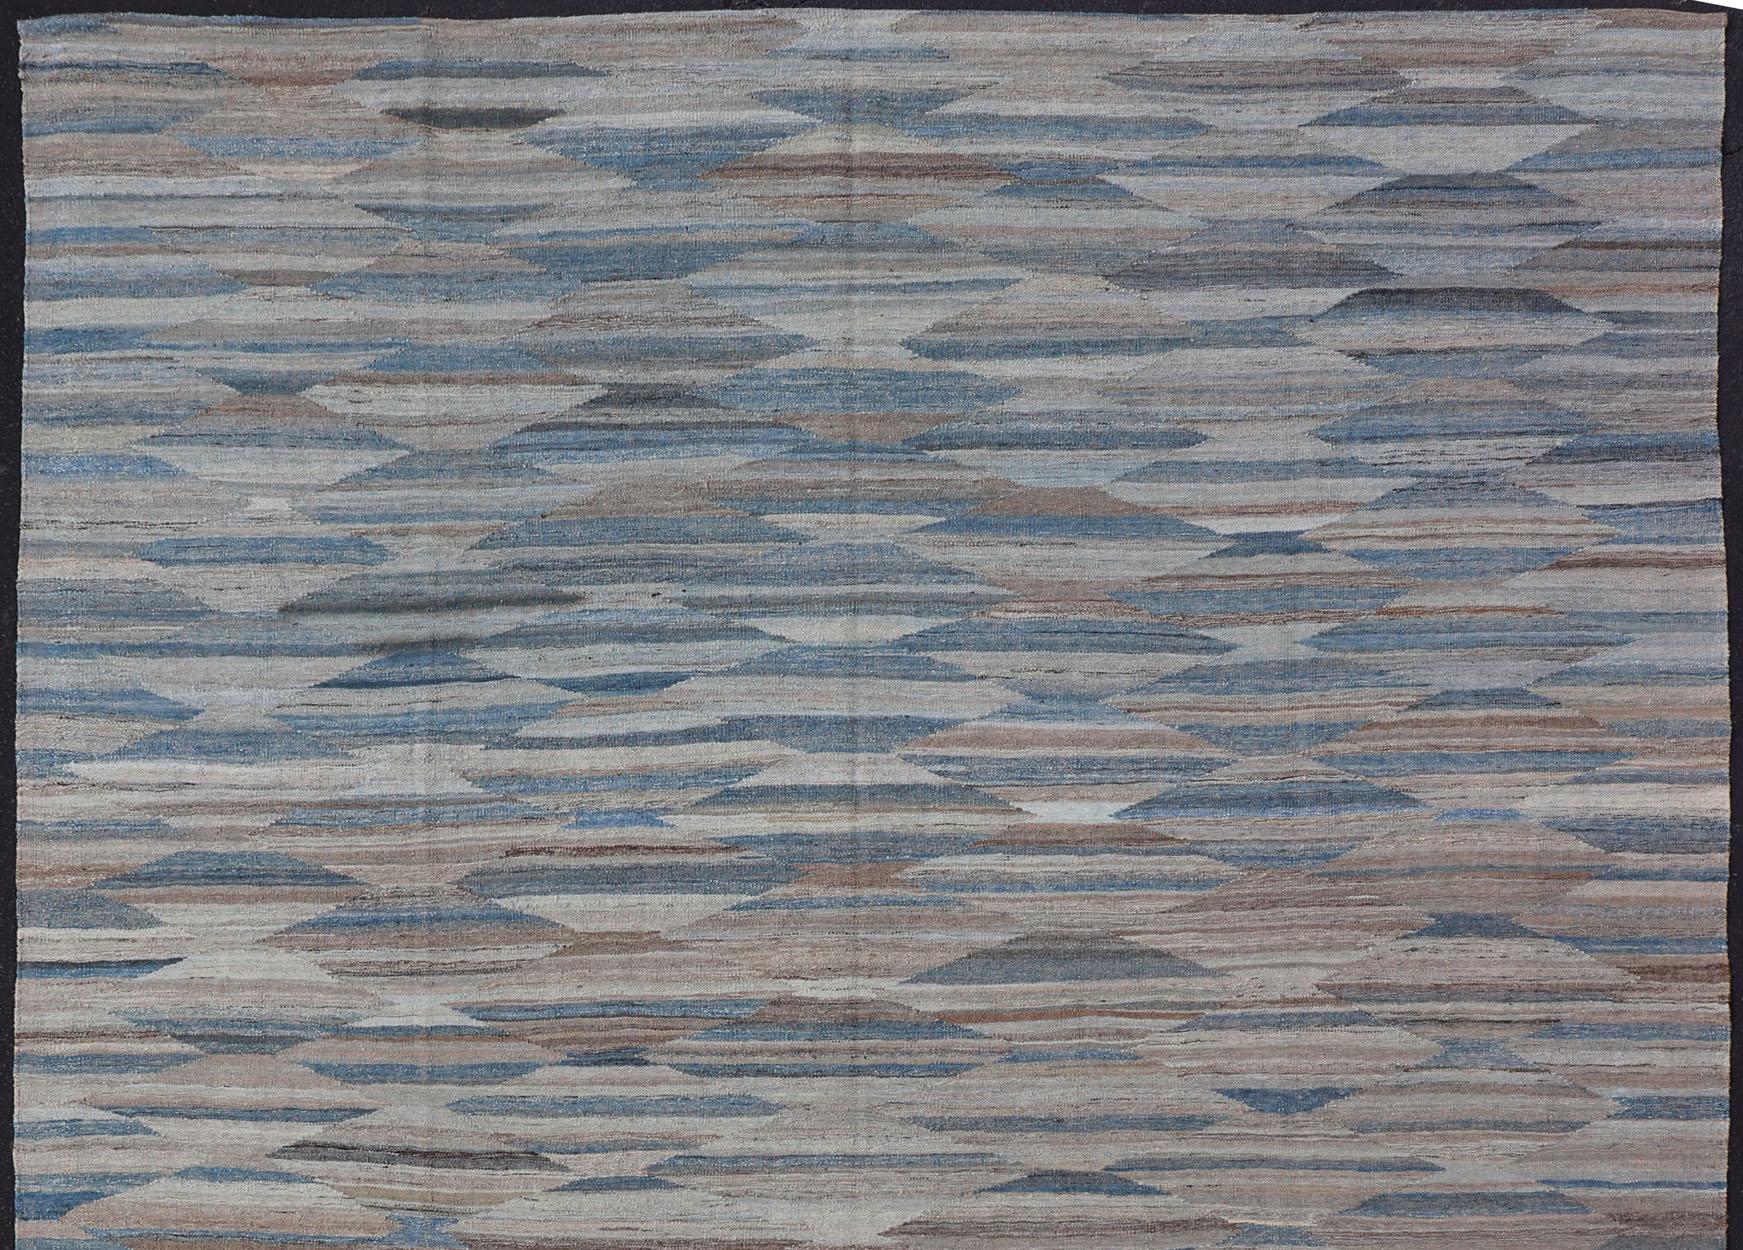 Afghan Modern Kilim All-Over Design in Blues, Browns, and Tan In Excellent Condition For Sale In Atlanta, GA